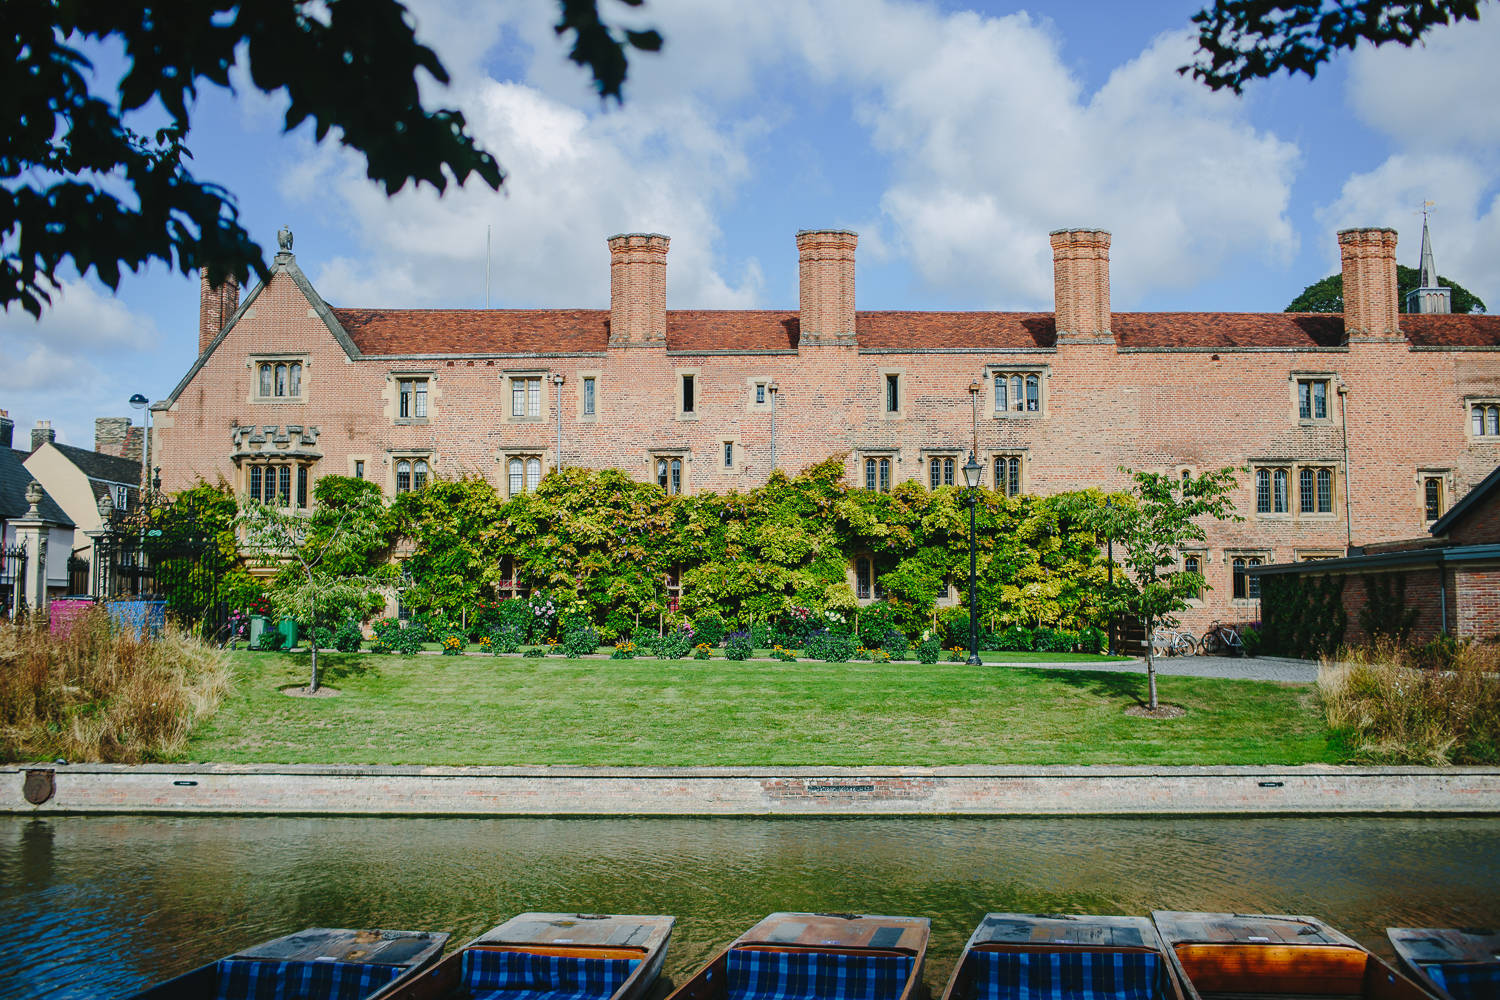 Scenic view of Magdalene college cambridge University, from across the river. Capture by Cambridge University Wedding Photographer